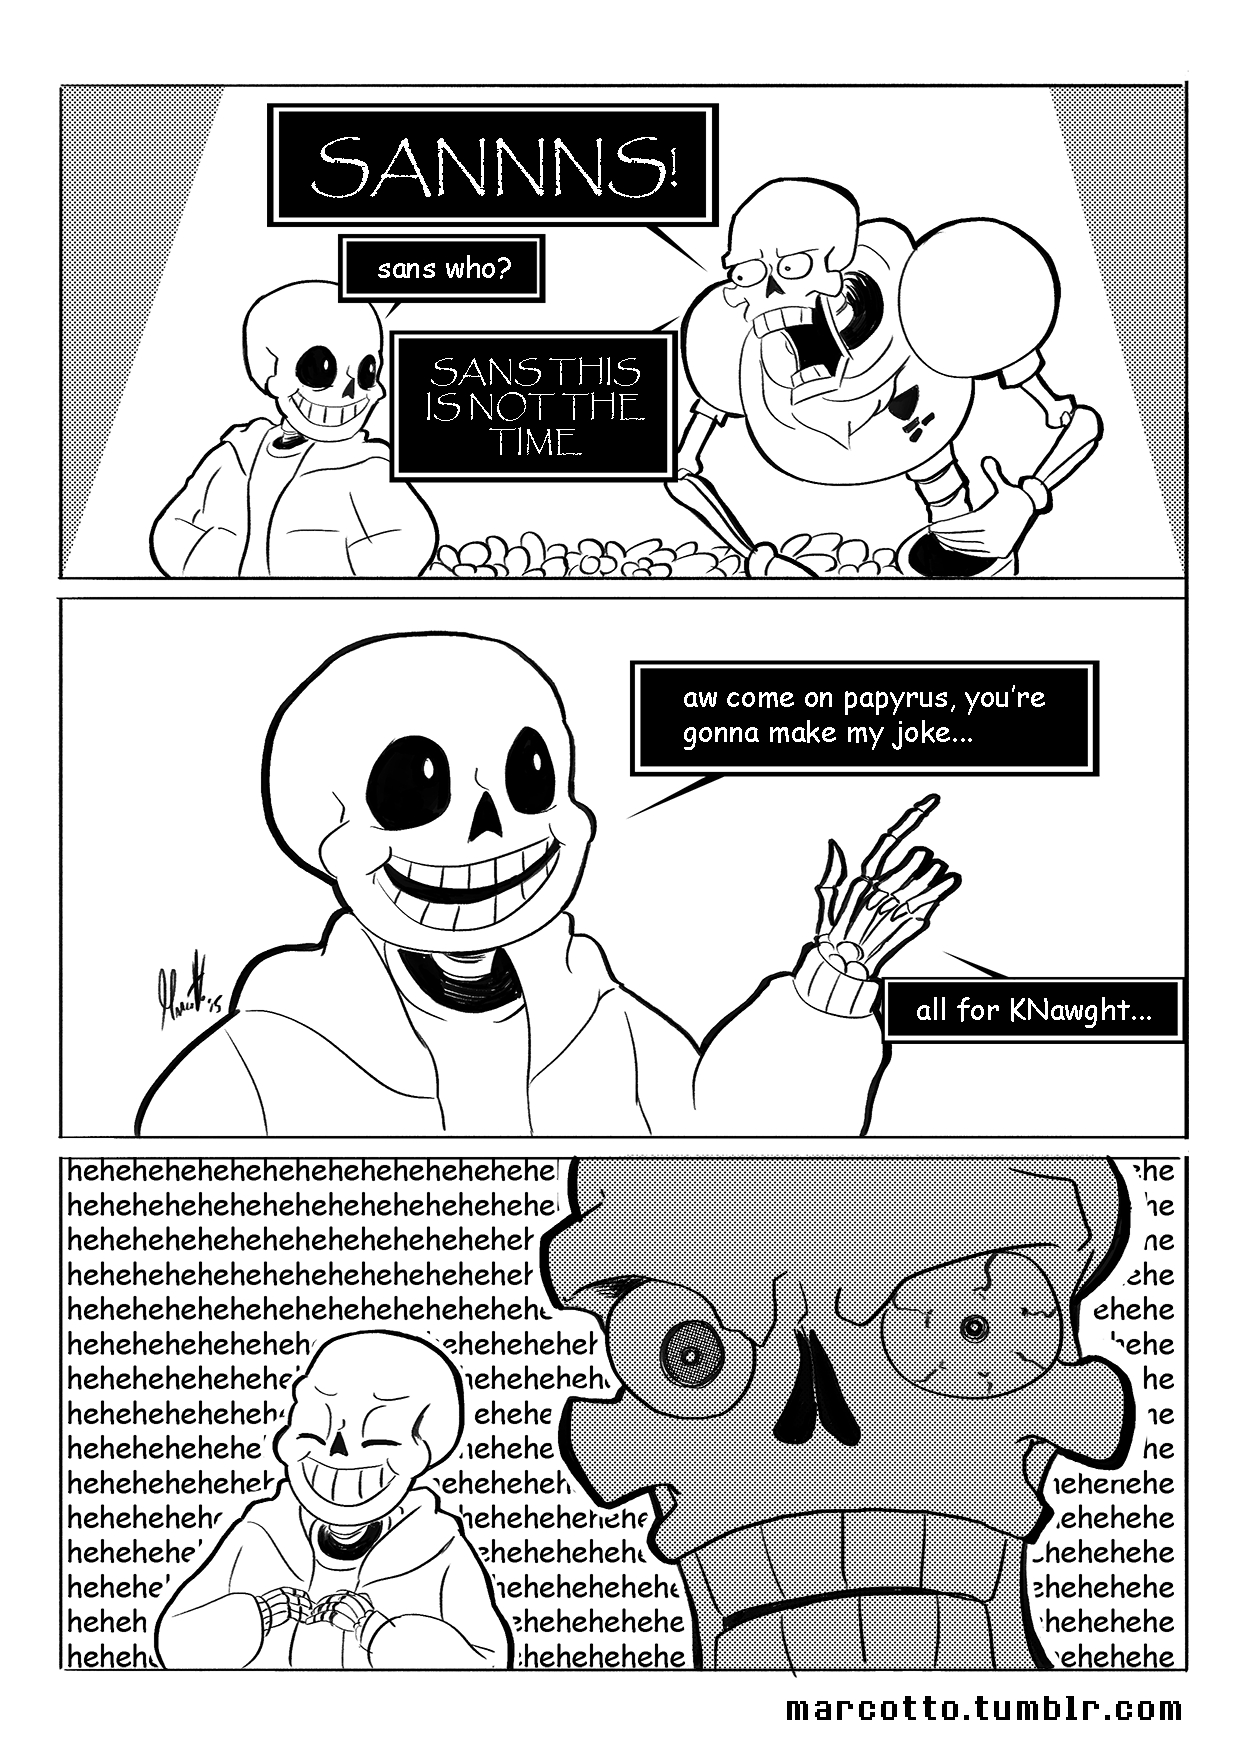 Nothing here but Marcotto • taotruths: Sans, there’s a time and a place ...